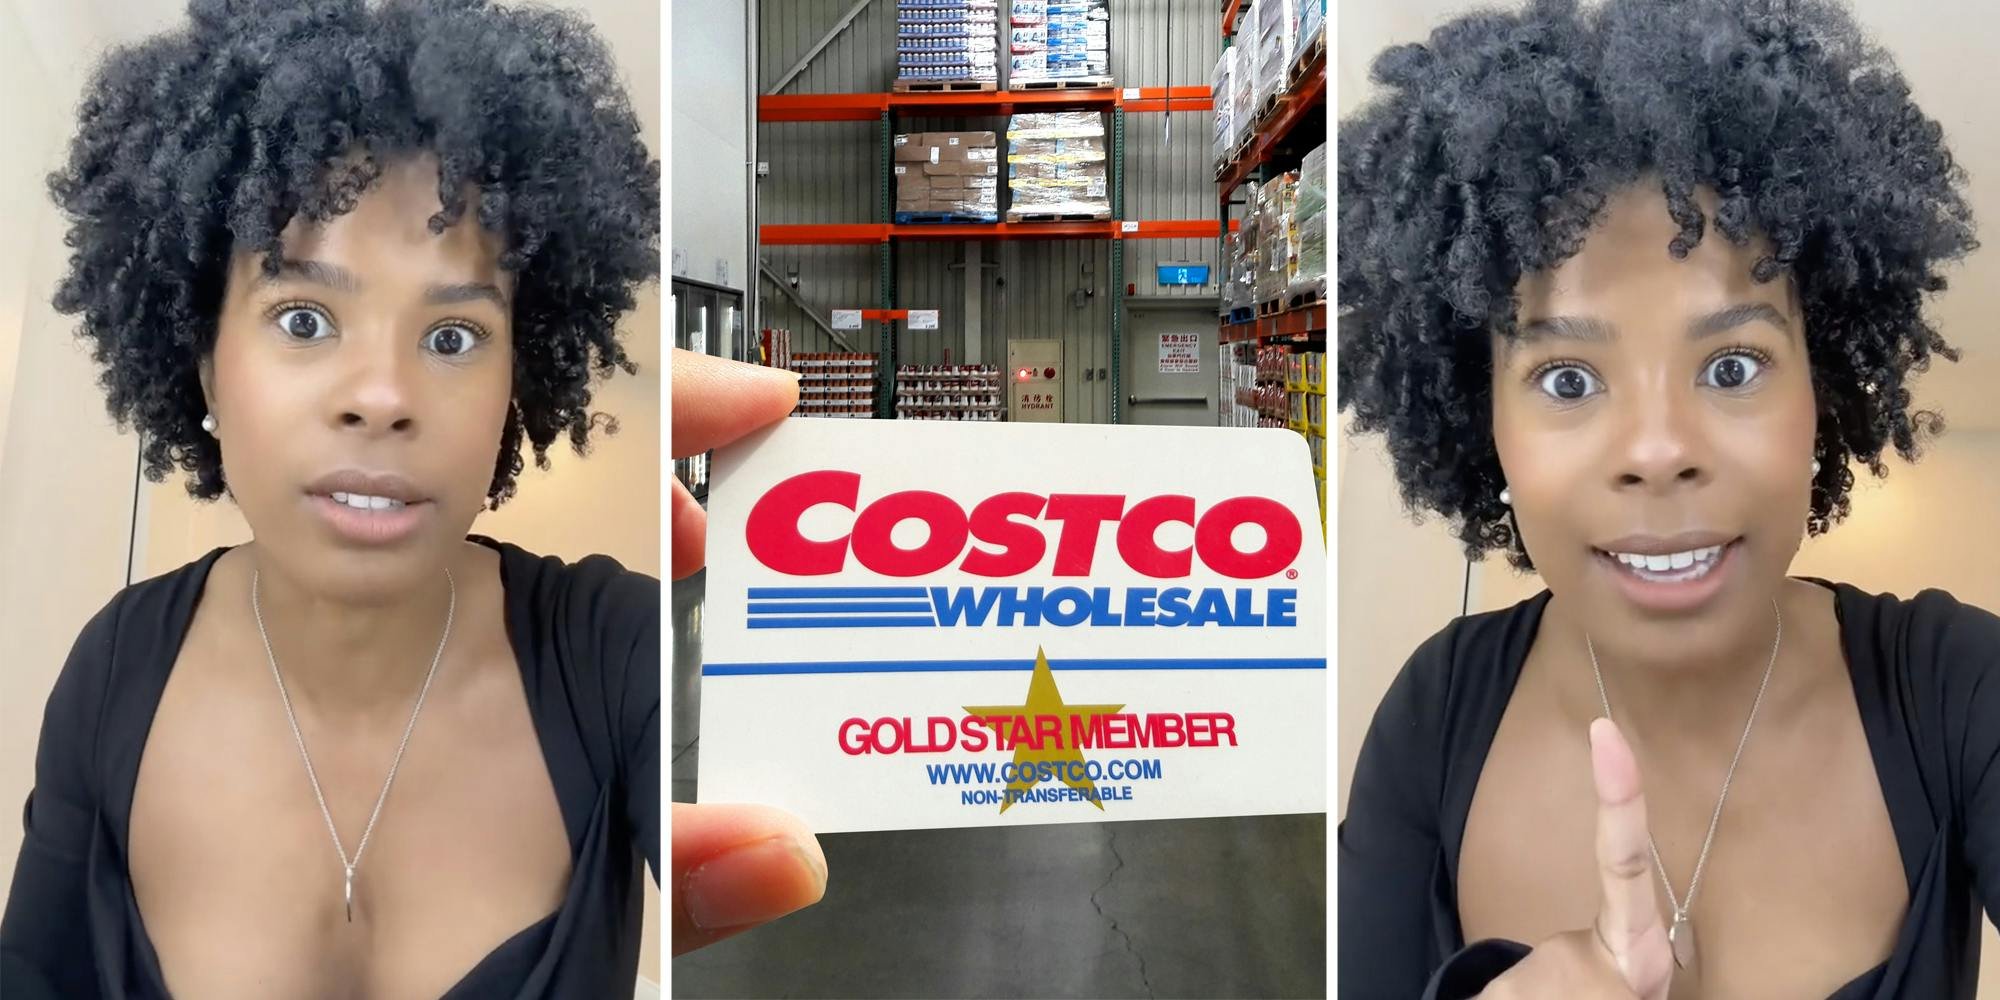 ‘They sell caskets too’: Customer shares little-known benefit of Costco membership that saved her hundreds of dollars